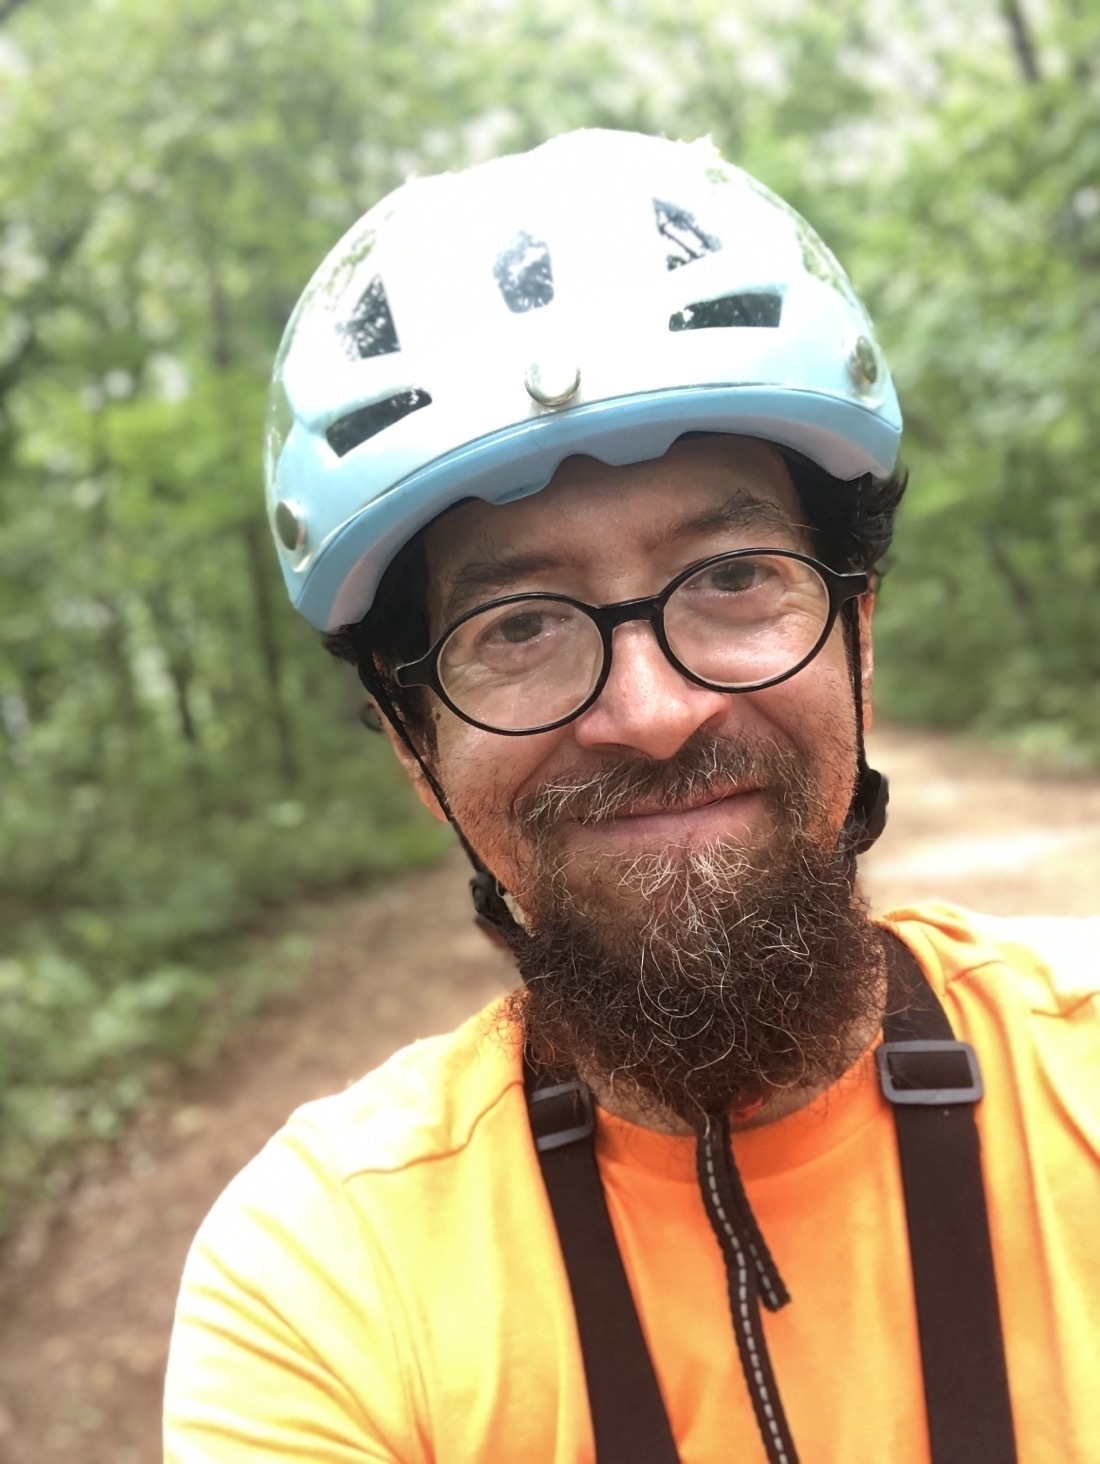 A beardy guy with glasses wearing a bluy cycling helmet and orange jersey